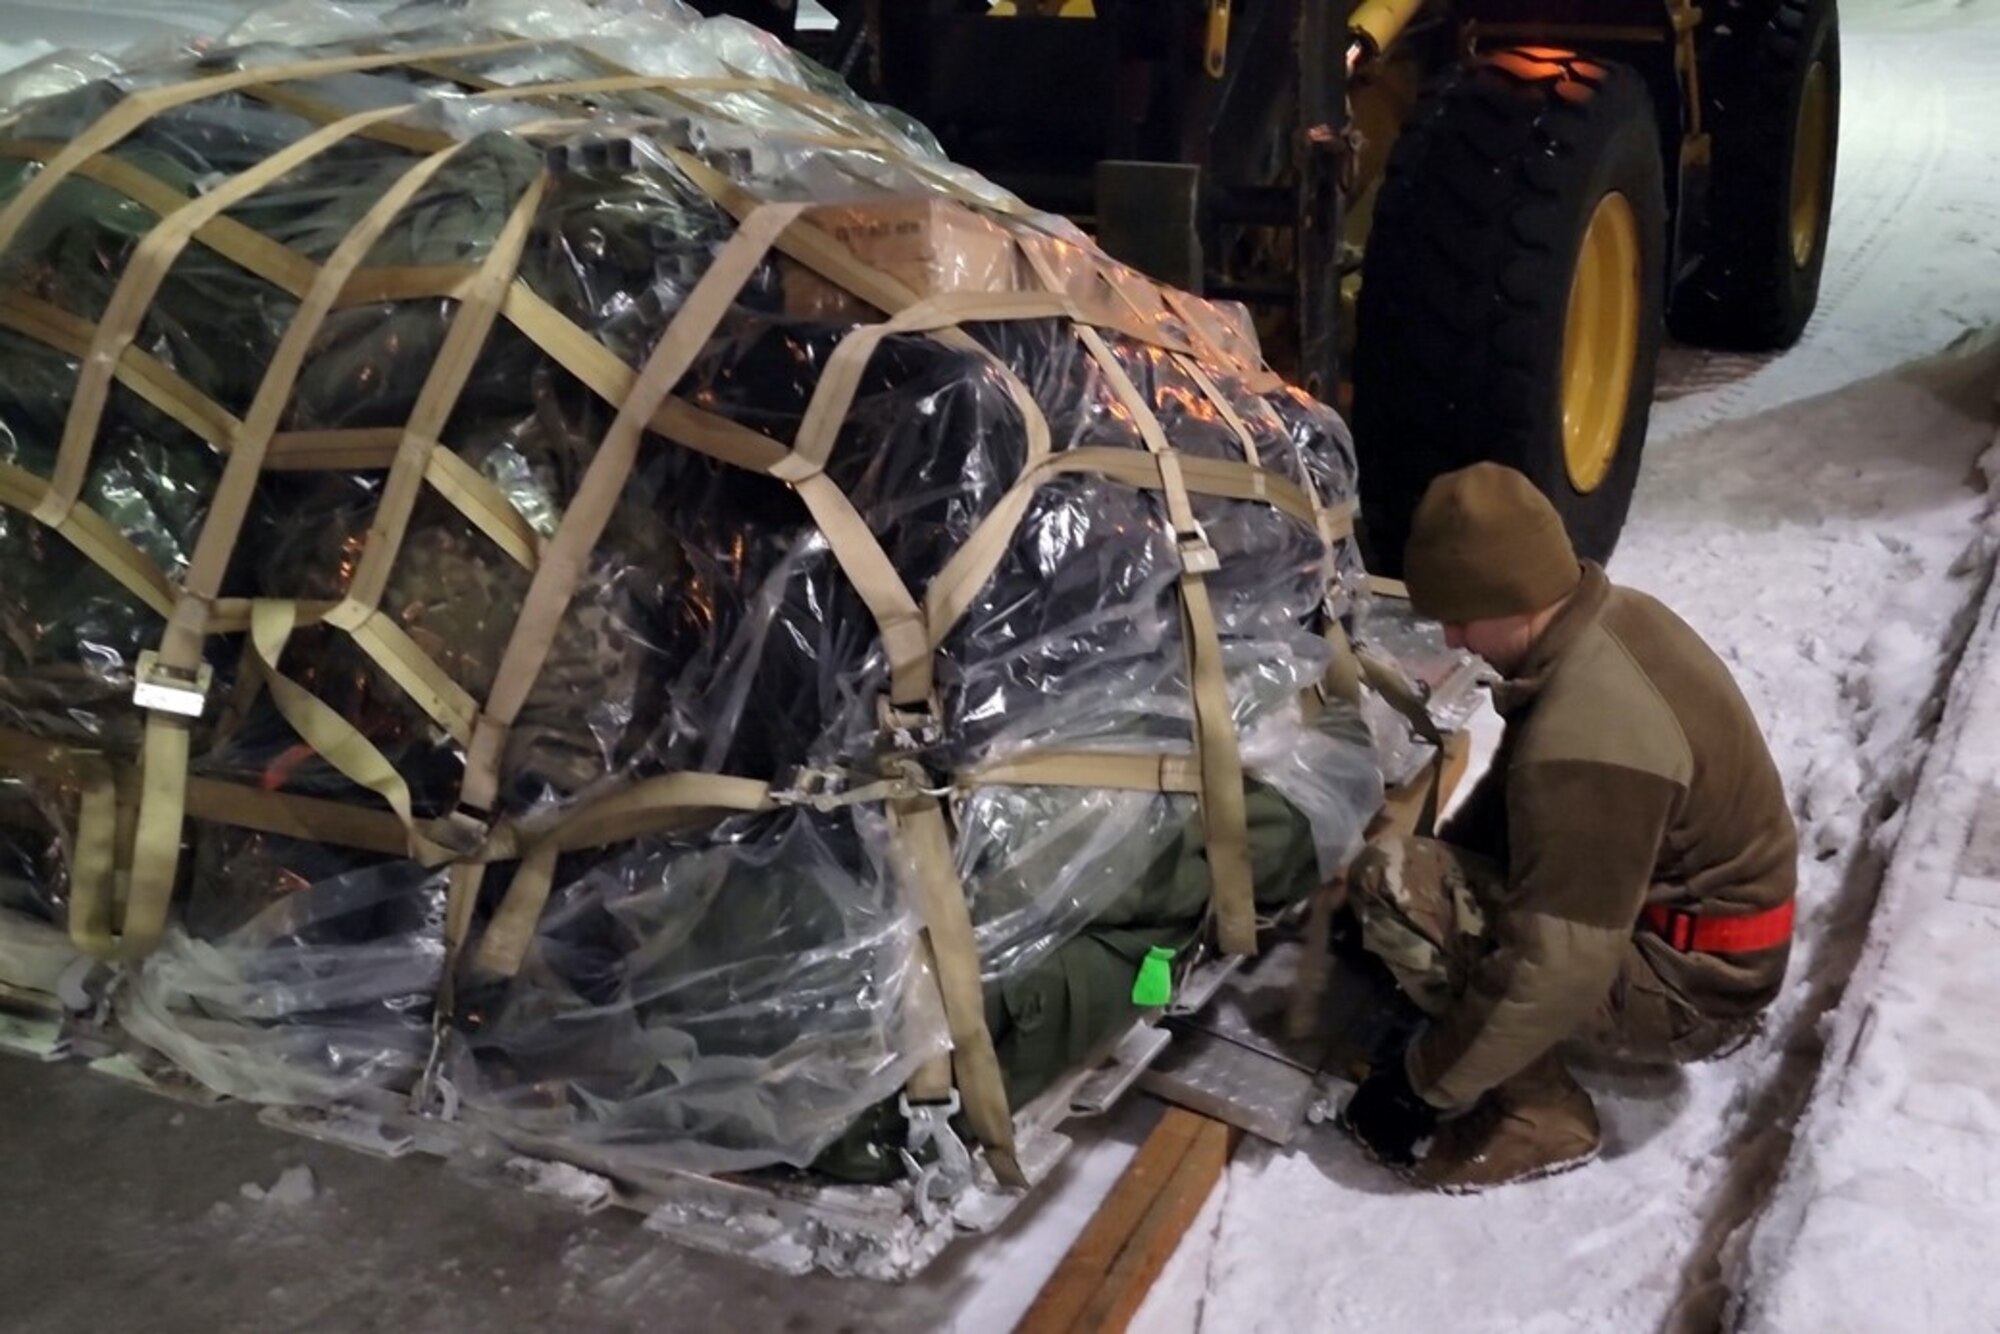 Alaska Air National Guard Master Sgt. Joshua Moore, 168th Logistics Readiness Squadron, loads cargo Jan. 12, 2022, on a 211th Rescue Squadron HC-130J Combat King II at Joint Base Elmendorf-Richardson, Alaska. The HC-130 was carrying 20 Alaska National Guard Soldiers and Airmen to Yakutat in response to a weather disaster. (U.S. Air Force courtesy photo by Master Sgt. Serjio Cerda)